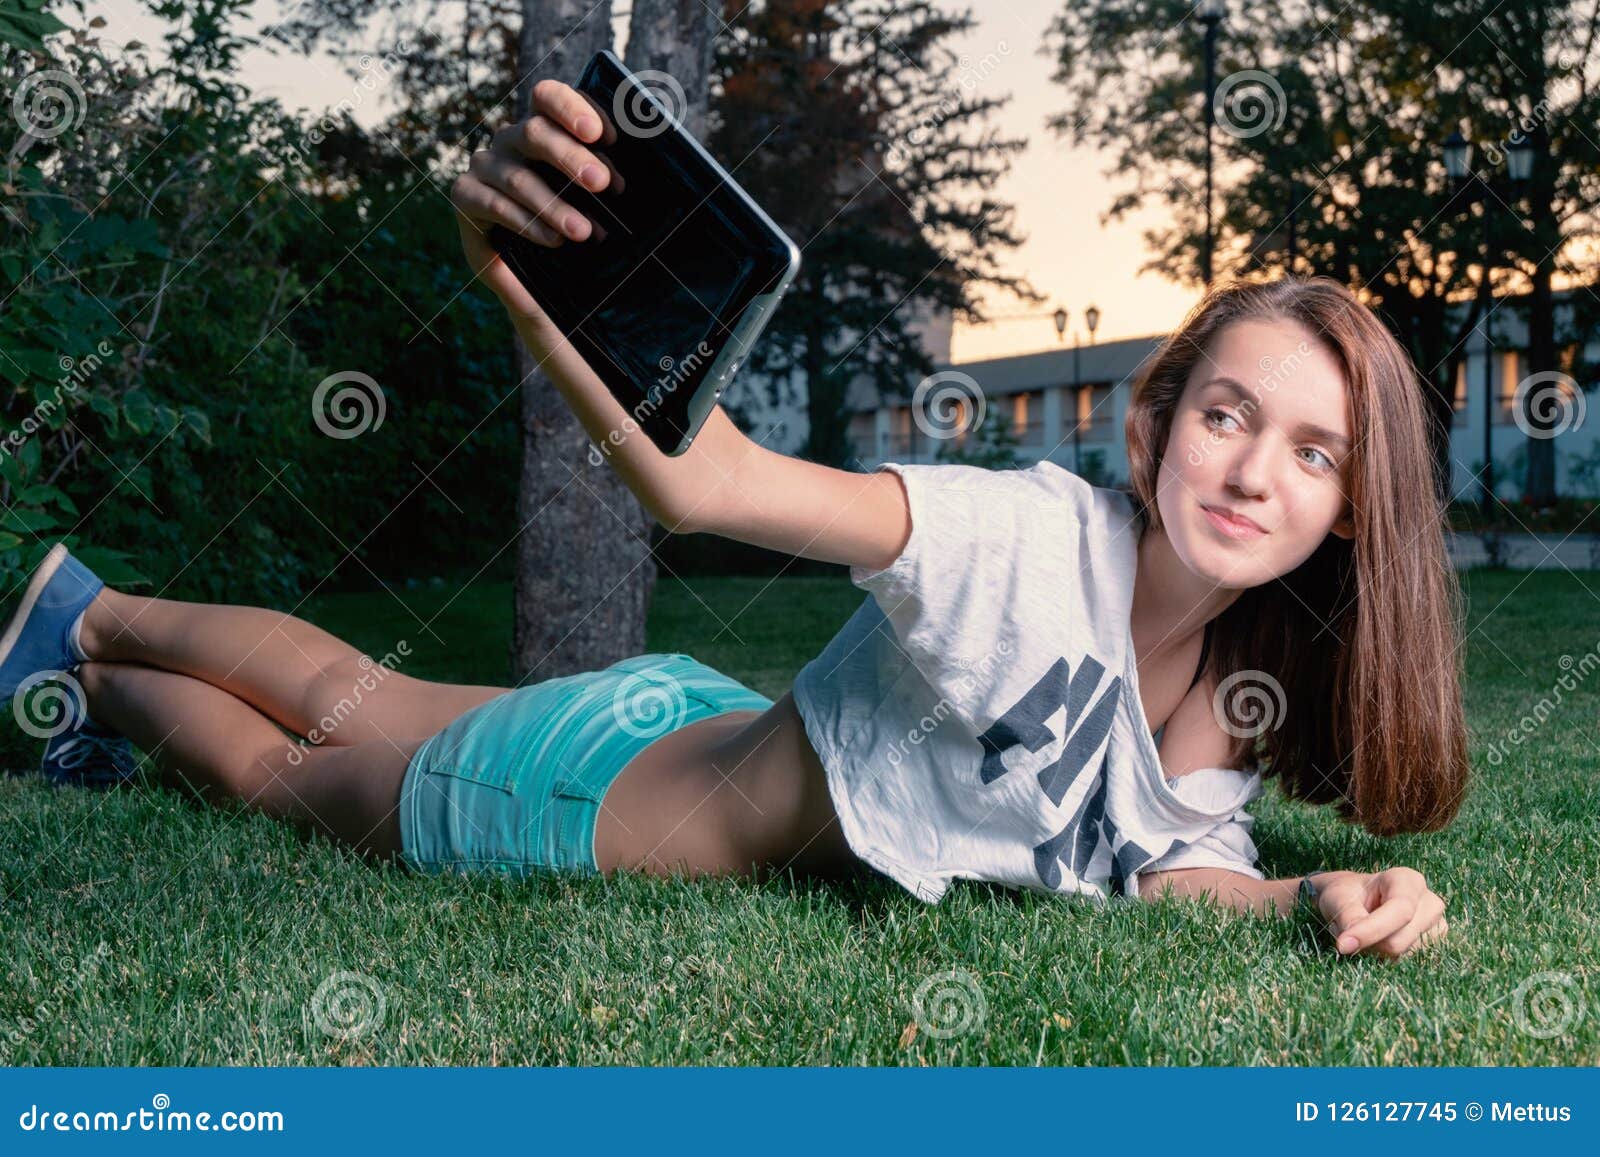 Happy Girl Make Selfie While Lying Down On Park Grass Summertime Fun